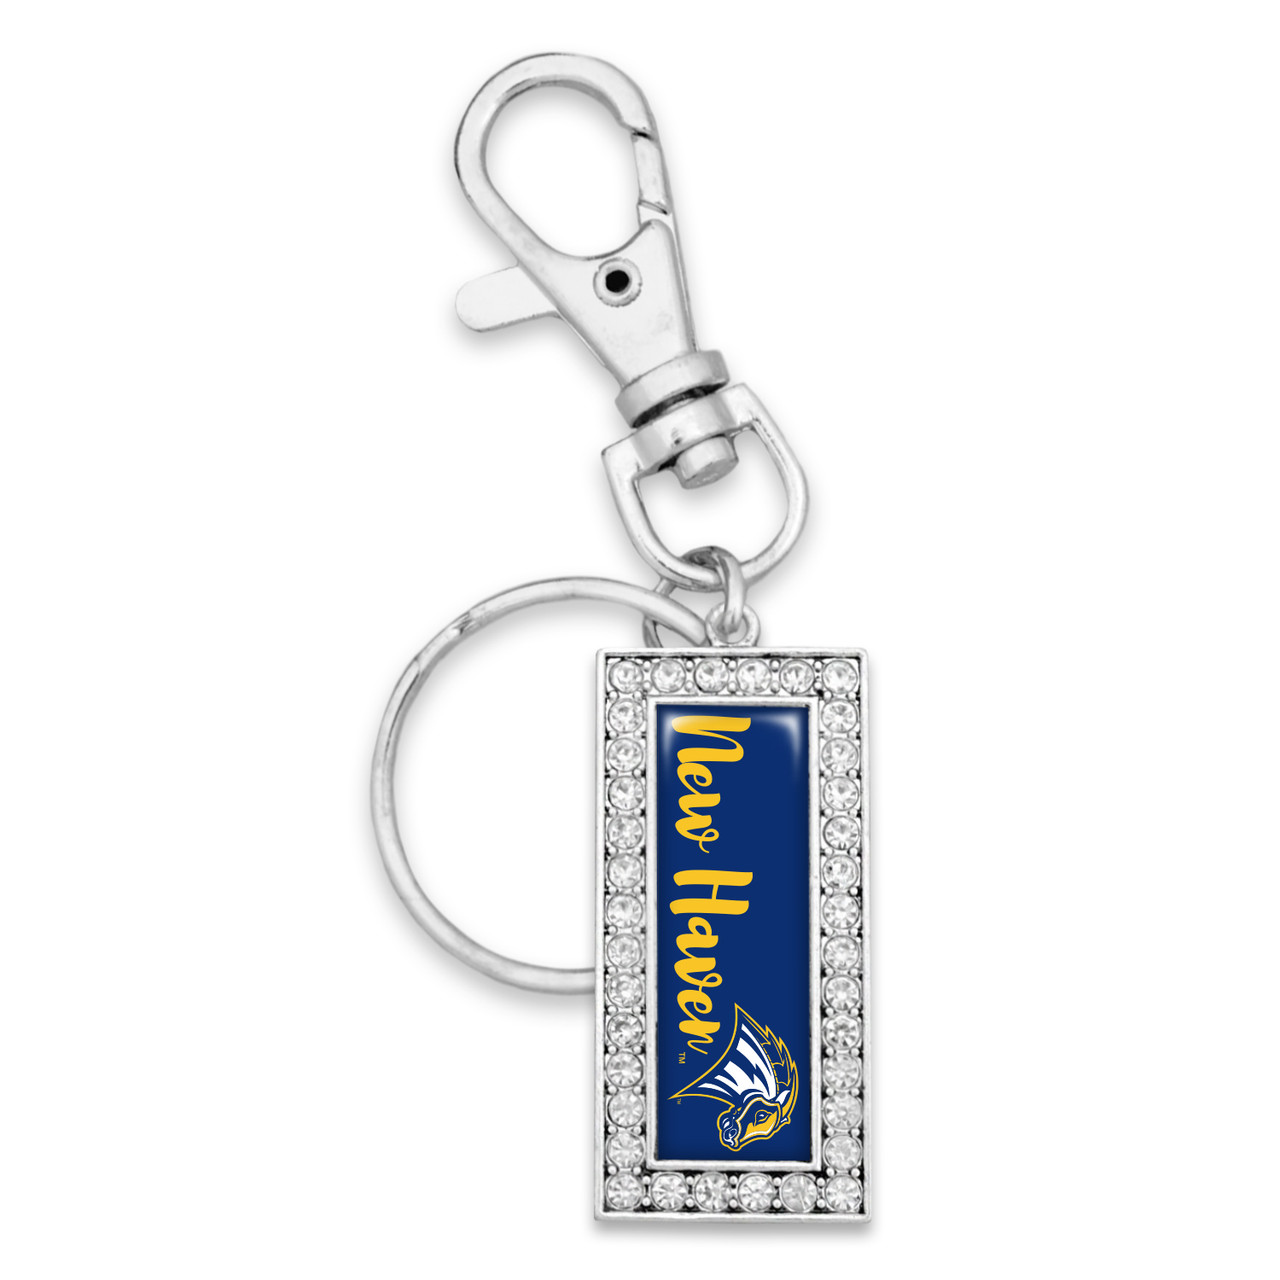 New Haven Chargers Key Chain- Script Logo